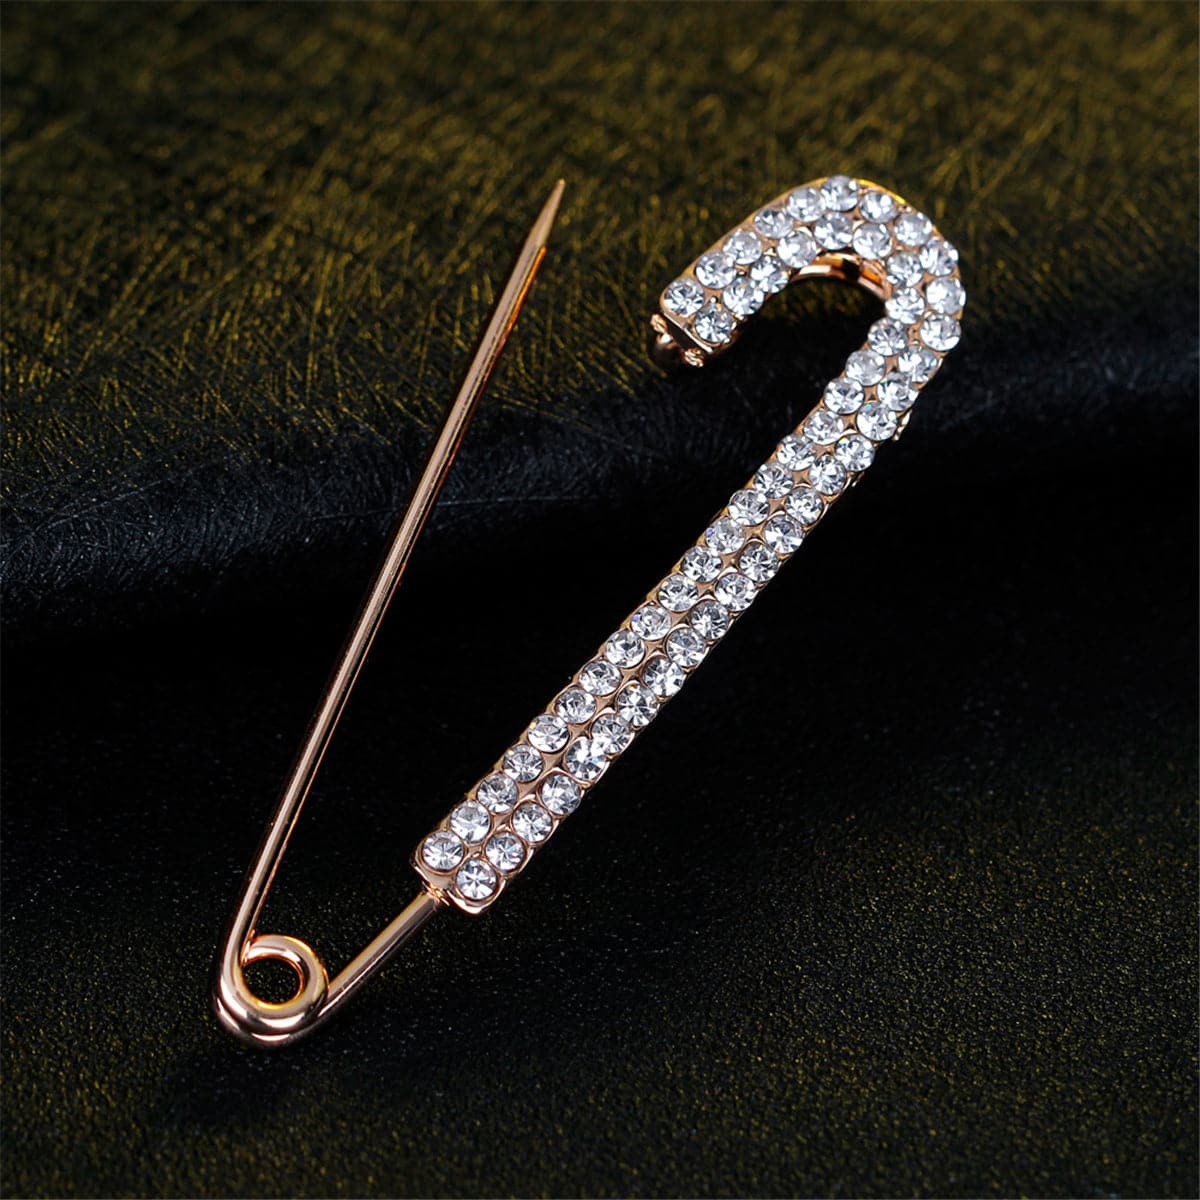 Cubic Zirconia & 18K Gold-Plated Pin Brooch